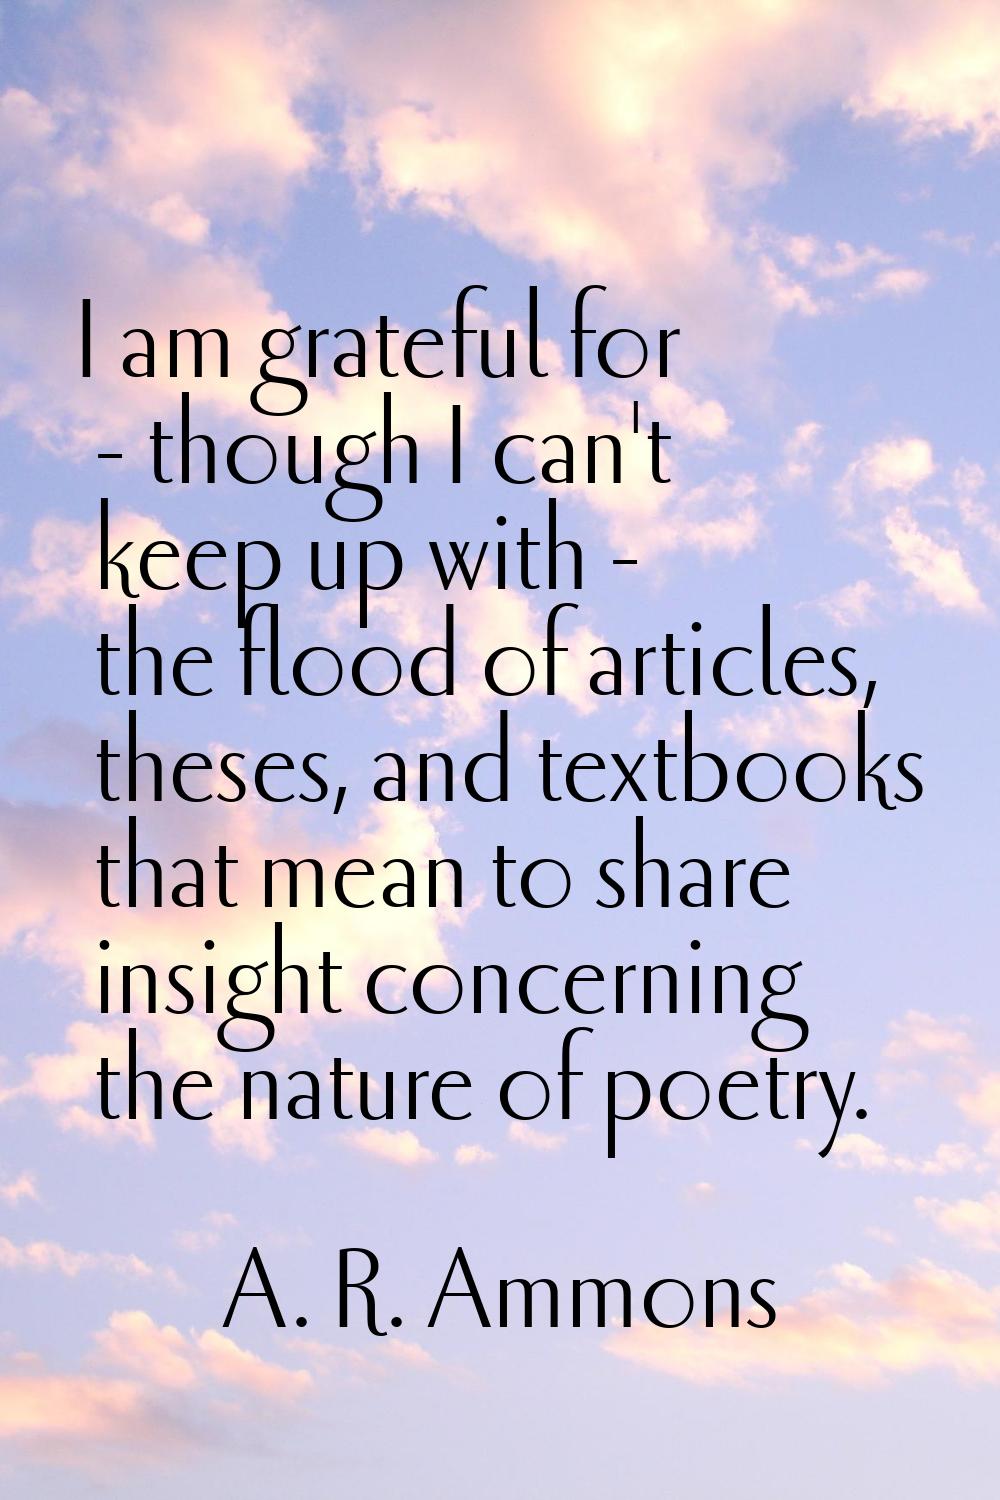 I am grateful for - though I can't keep up with - the flood of articles, theses, and textbooks that